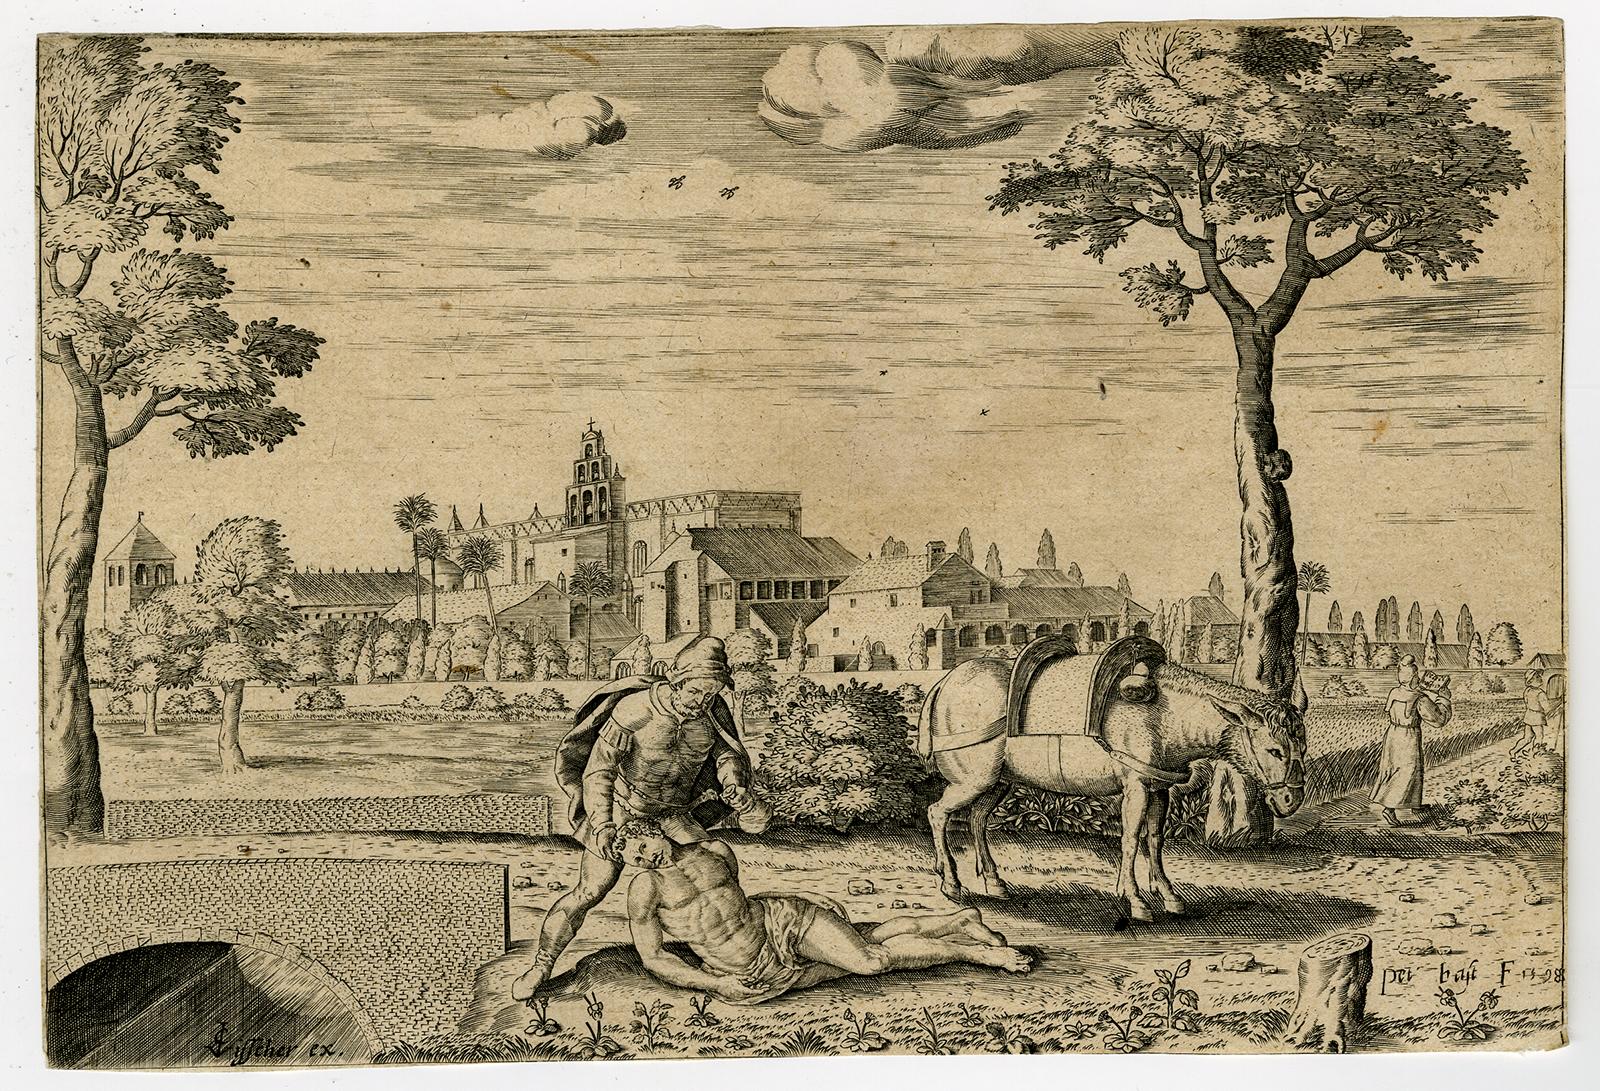 Subject: Antique Master Print, untitled. Southern landscape with the scene of the Good Samaritan. Rare, even the second state of this print published by Visscher is uncommon.
 
 Description: Source unknown, to be determined. State: Second state of